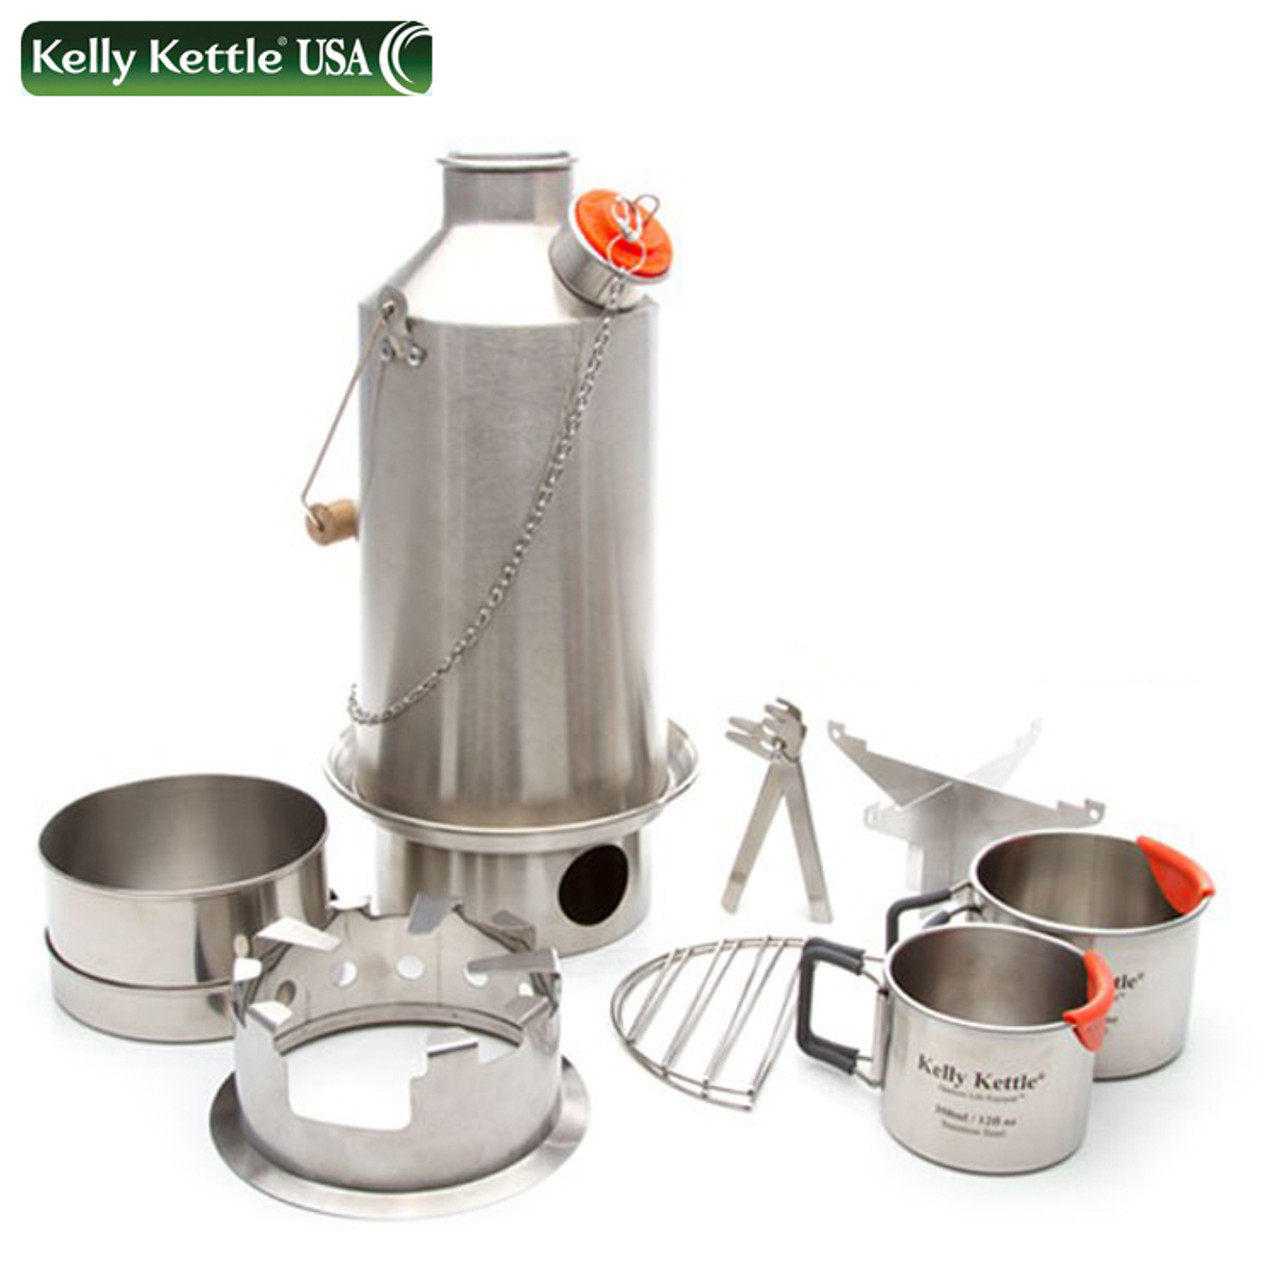 Kelly Kettle 50115 Hobo Stove - To Be Used With Stainless Steel Fire Ring  From Base Camp or Scout To Hold Pots Or Pans - CSI